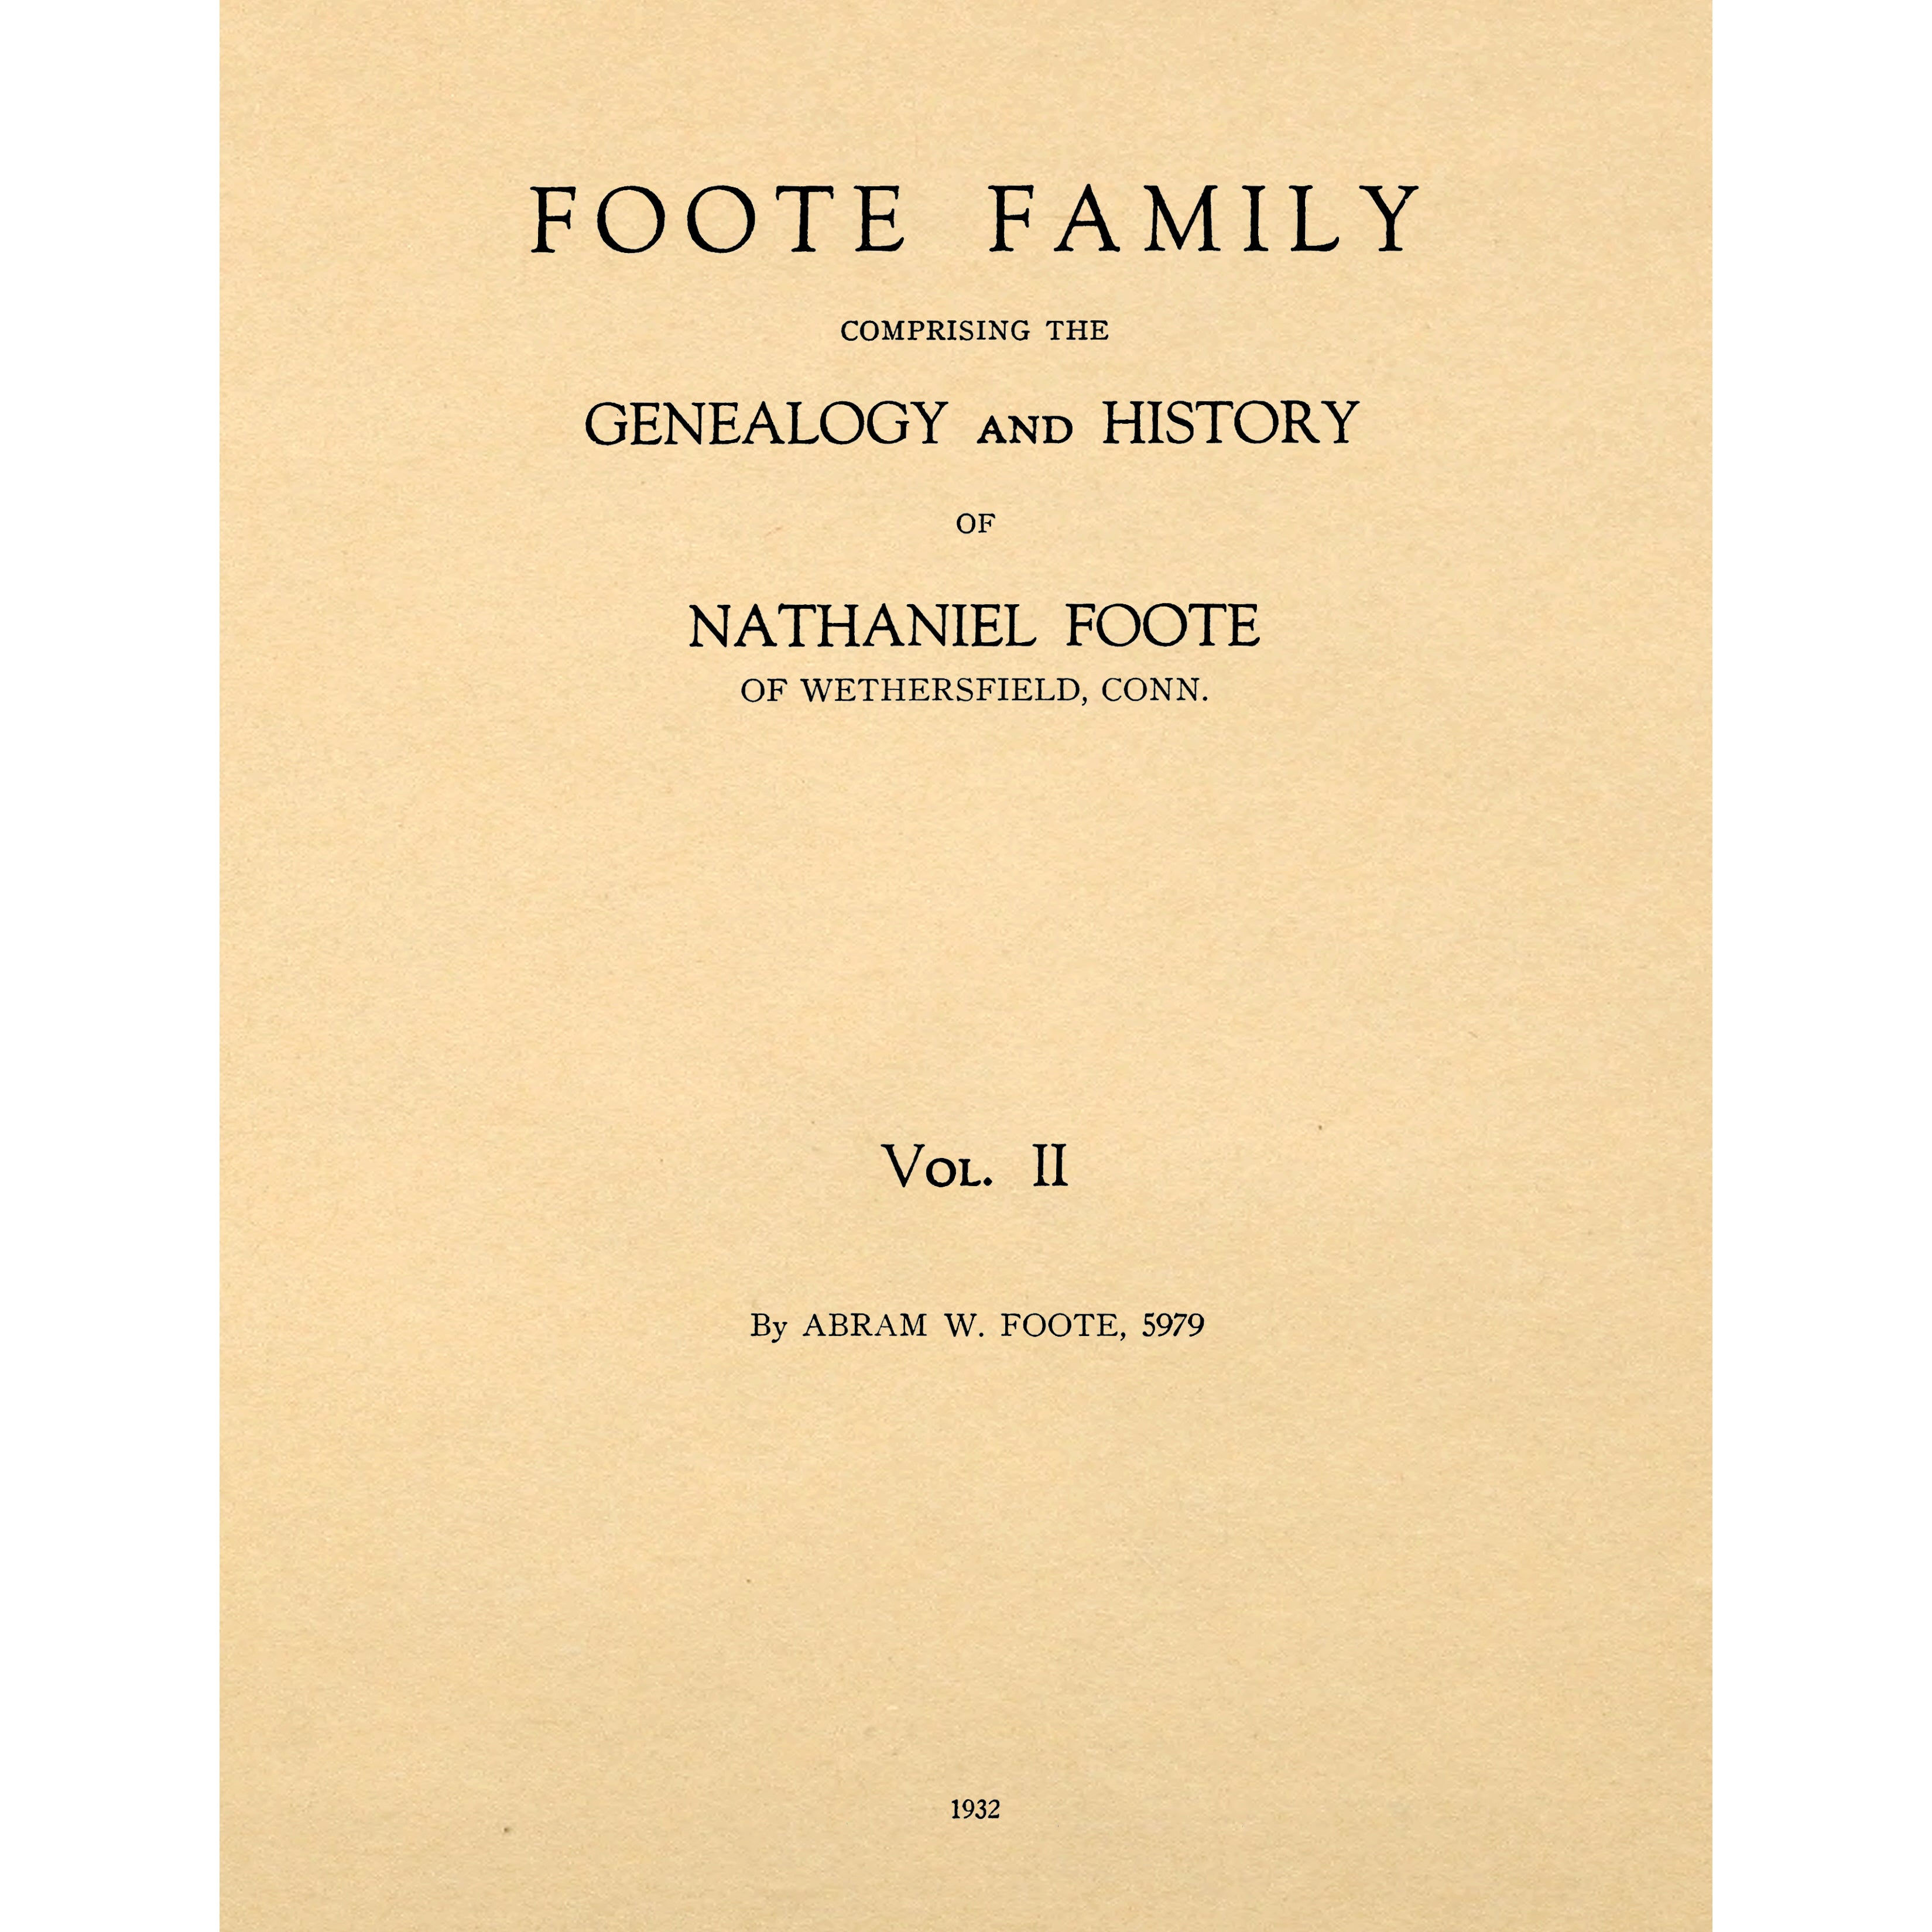 Foote family, comprising the genealogy and history of Nathaniel Foote, of Wethersfield, Conn., and his descendants; Foote family, comprising the genealogy and history of Nathaniel Foote, of Wethersfield, Conn., and his descendants;olume II